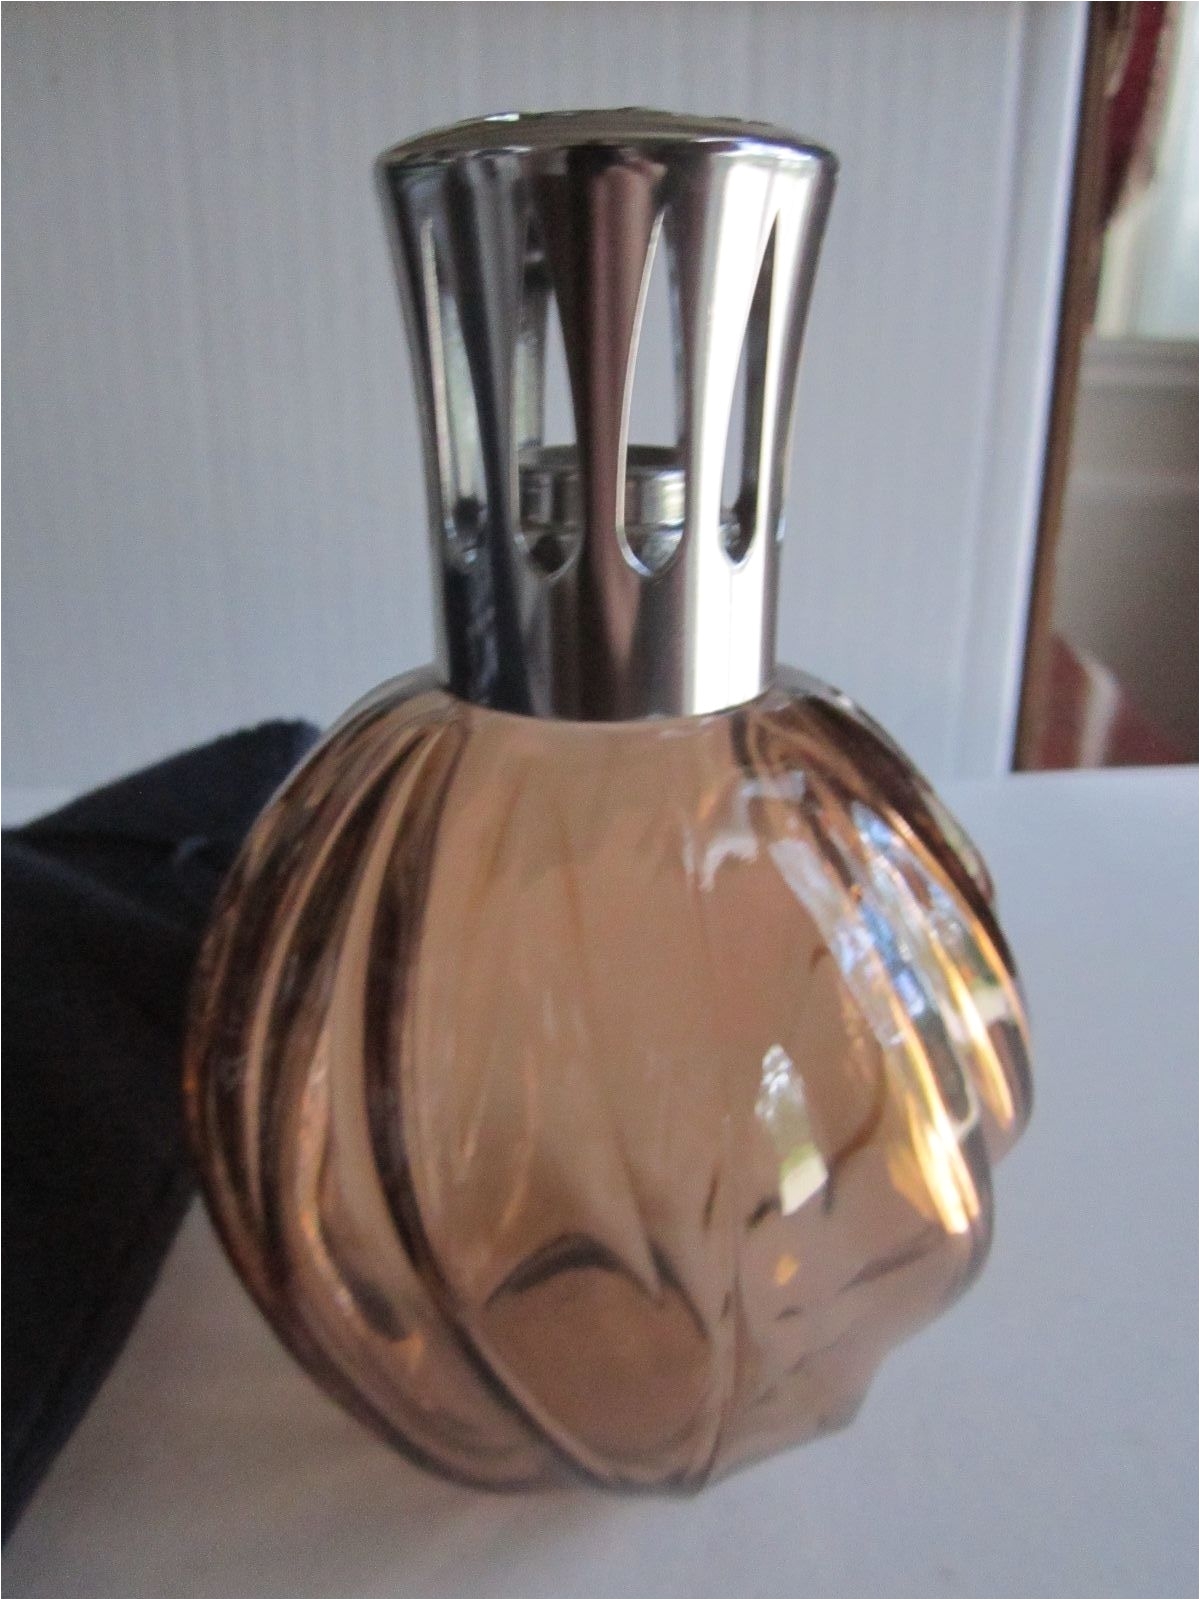 lampe berger paris fragrance lamp in the box amber color glass 1 of 6free shipping lampe berger